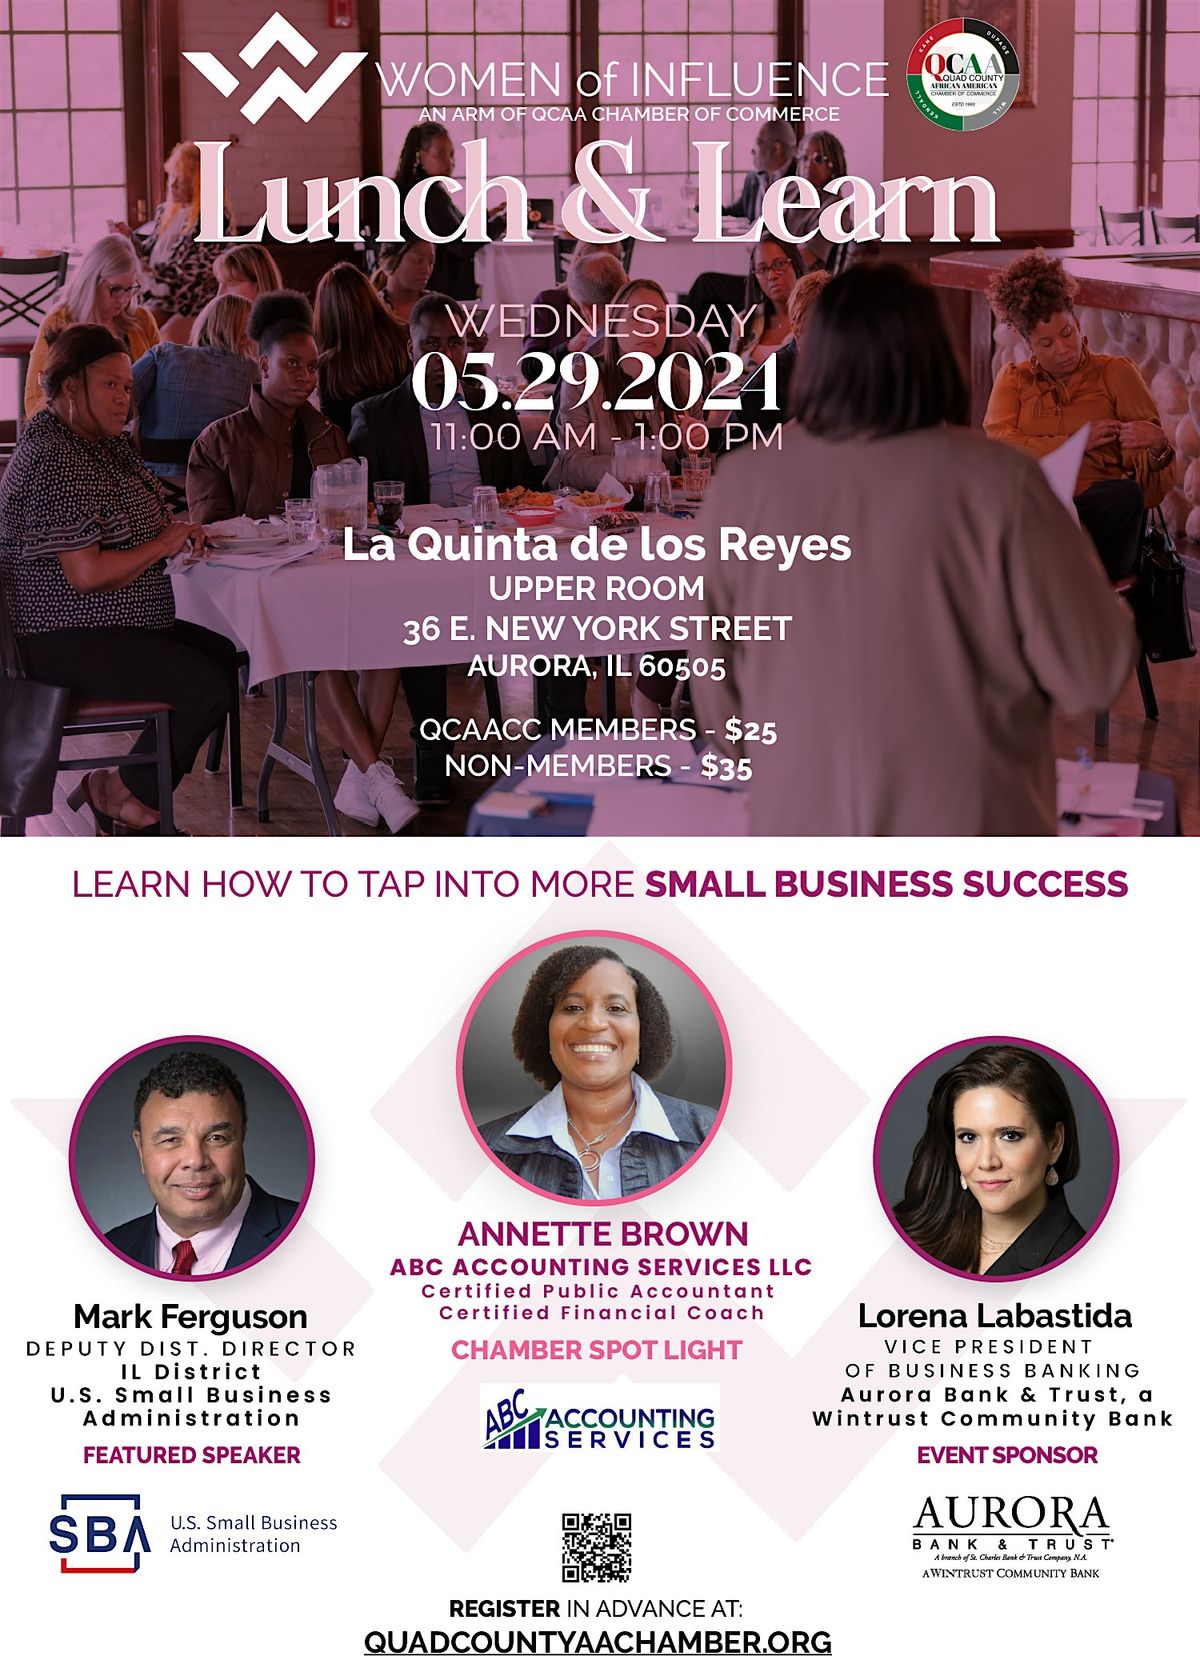 Learn How to Tap into Small Business Success through SBA Funding Sources